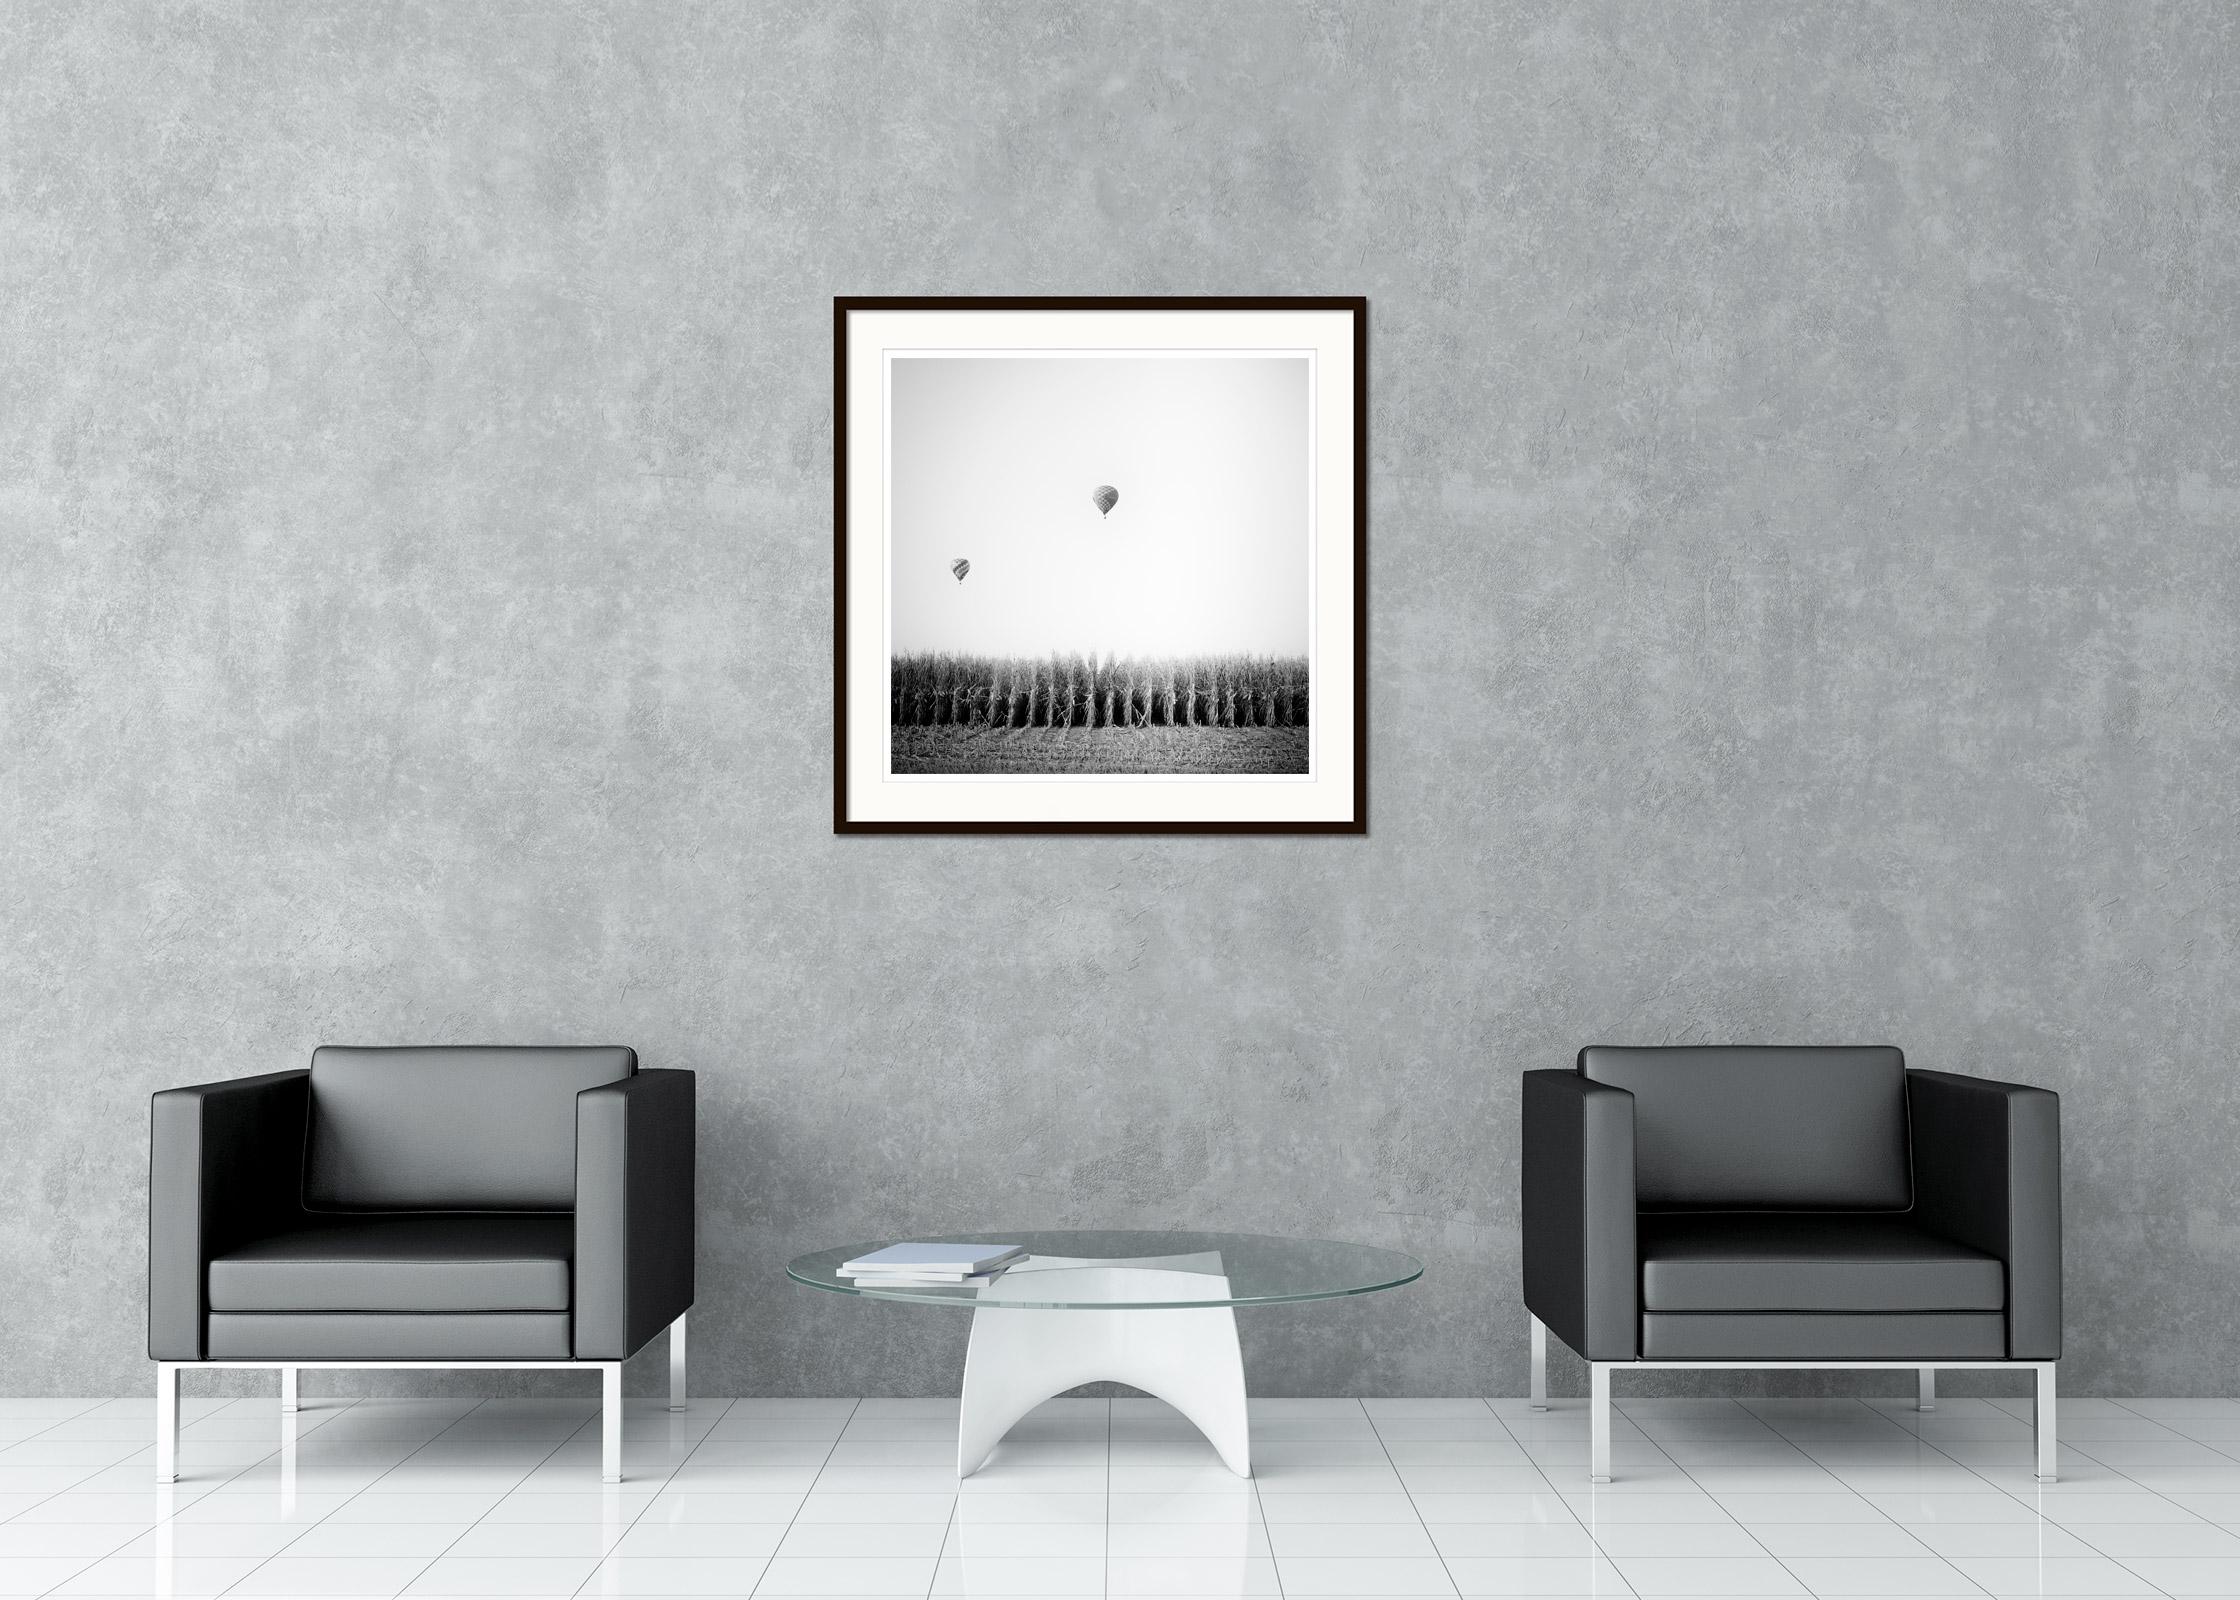 Black and white fine art landscape photography. Archival pigment ink print as part of a limited edition of 9. All Gerald Berghammer prints are made to order in limited editions on Hahnemuehle Photo Rag Baryta. Each print is stamped on the back and